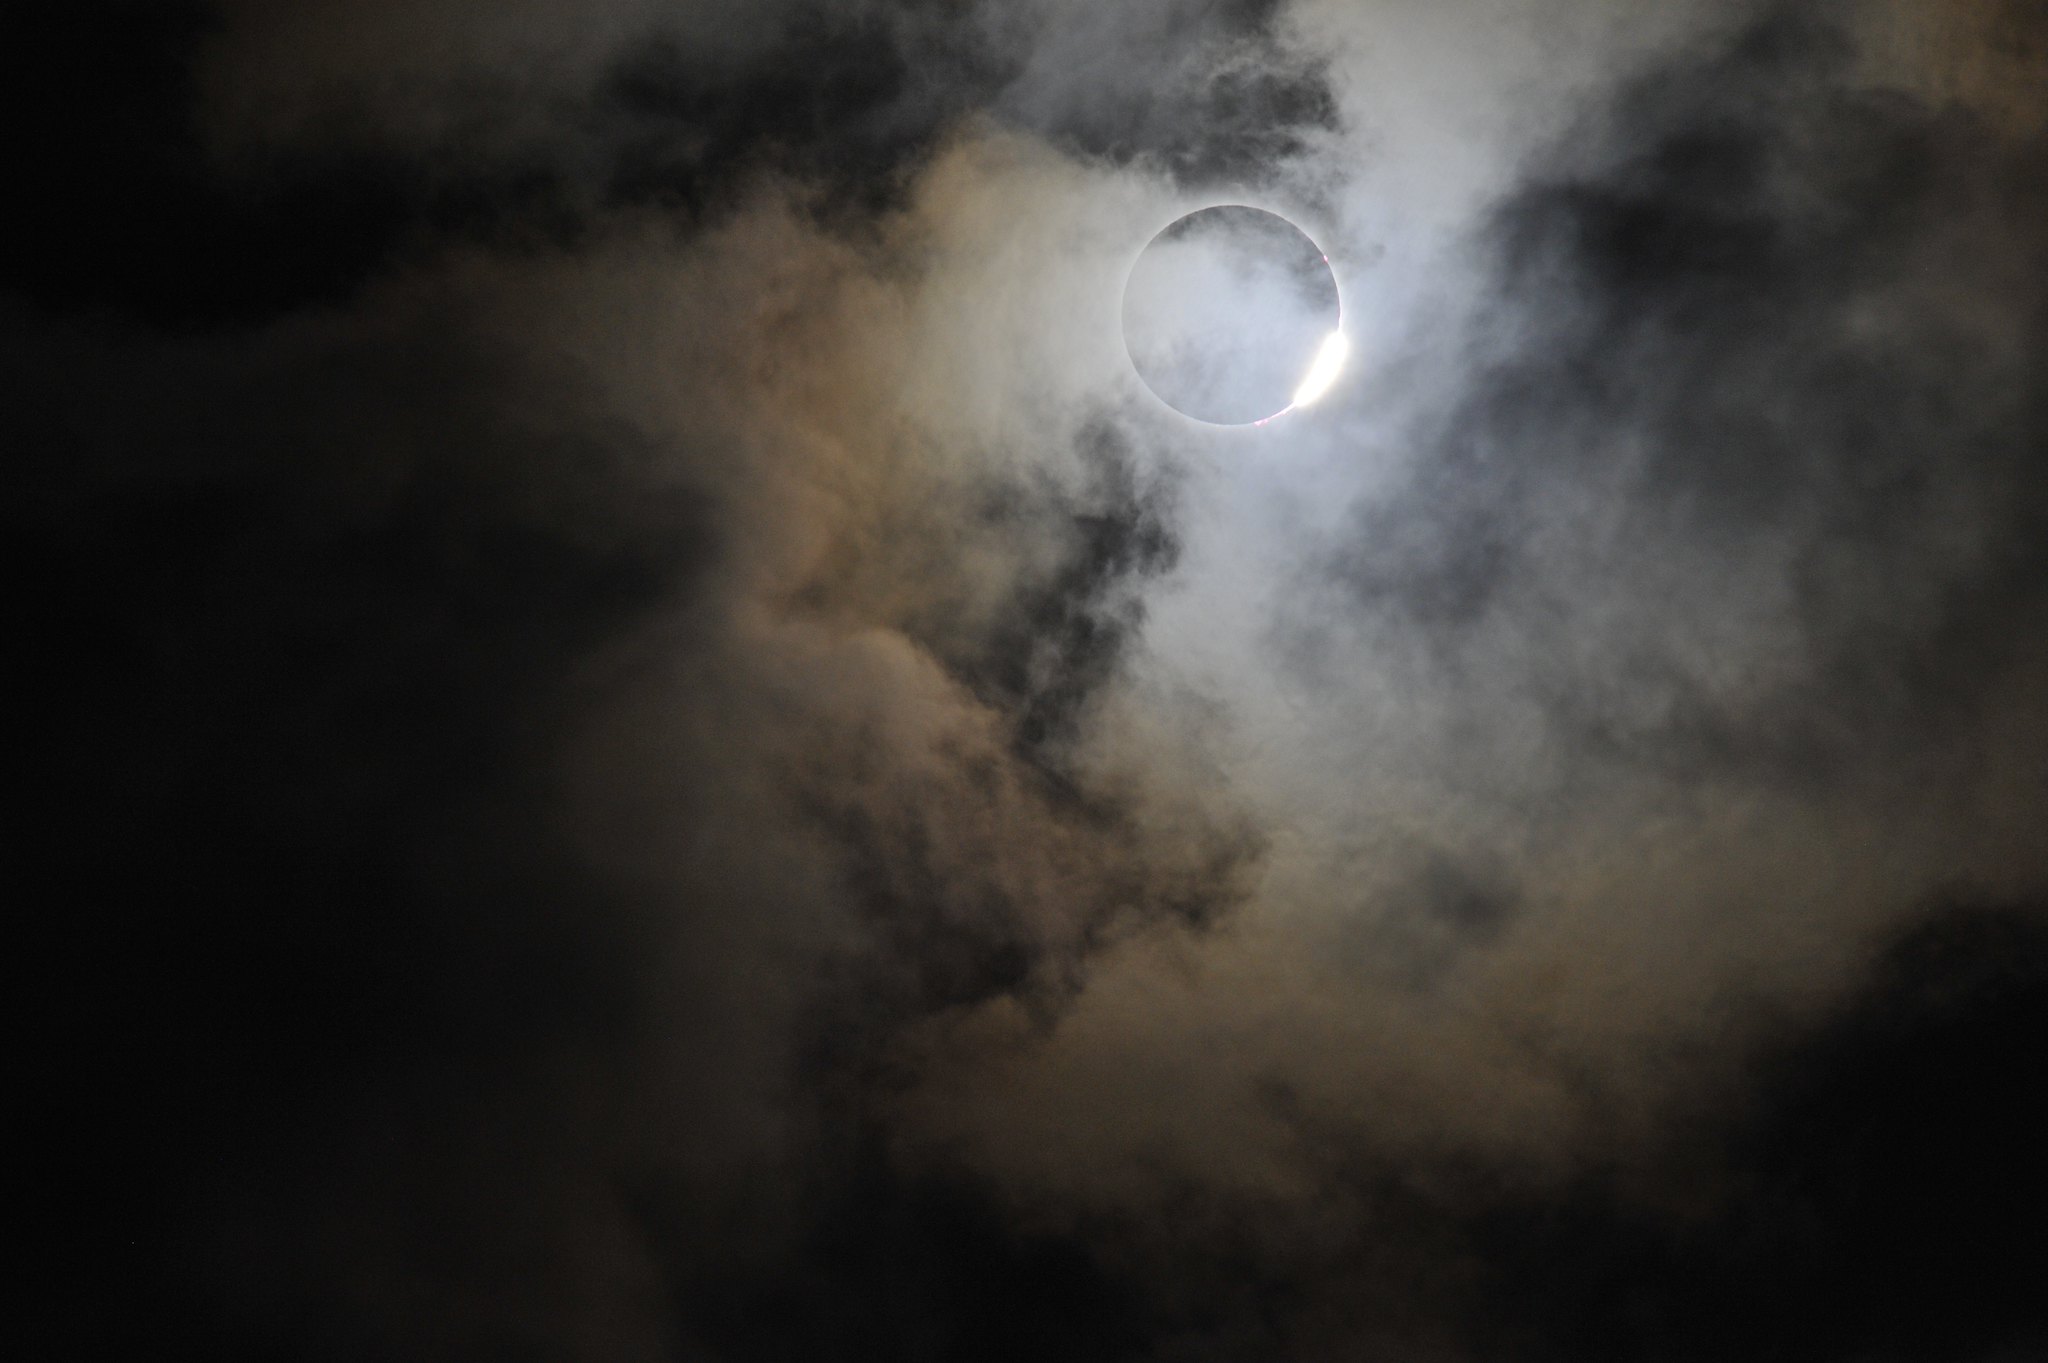 Diffraction solar corona with diamond ring after 2012 total solar eclipse